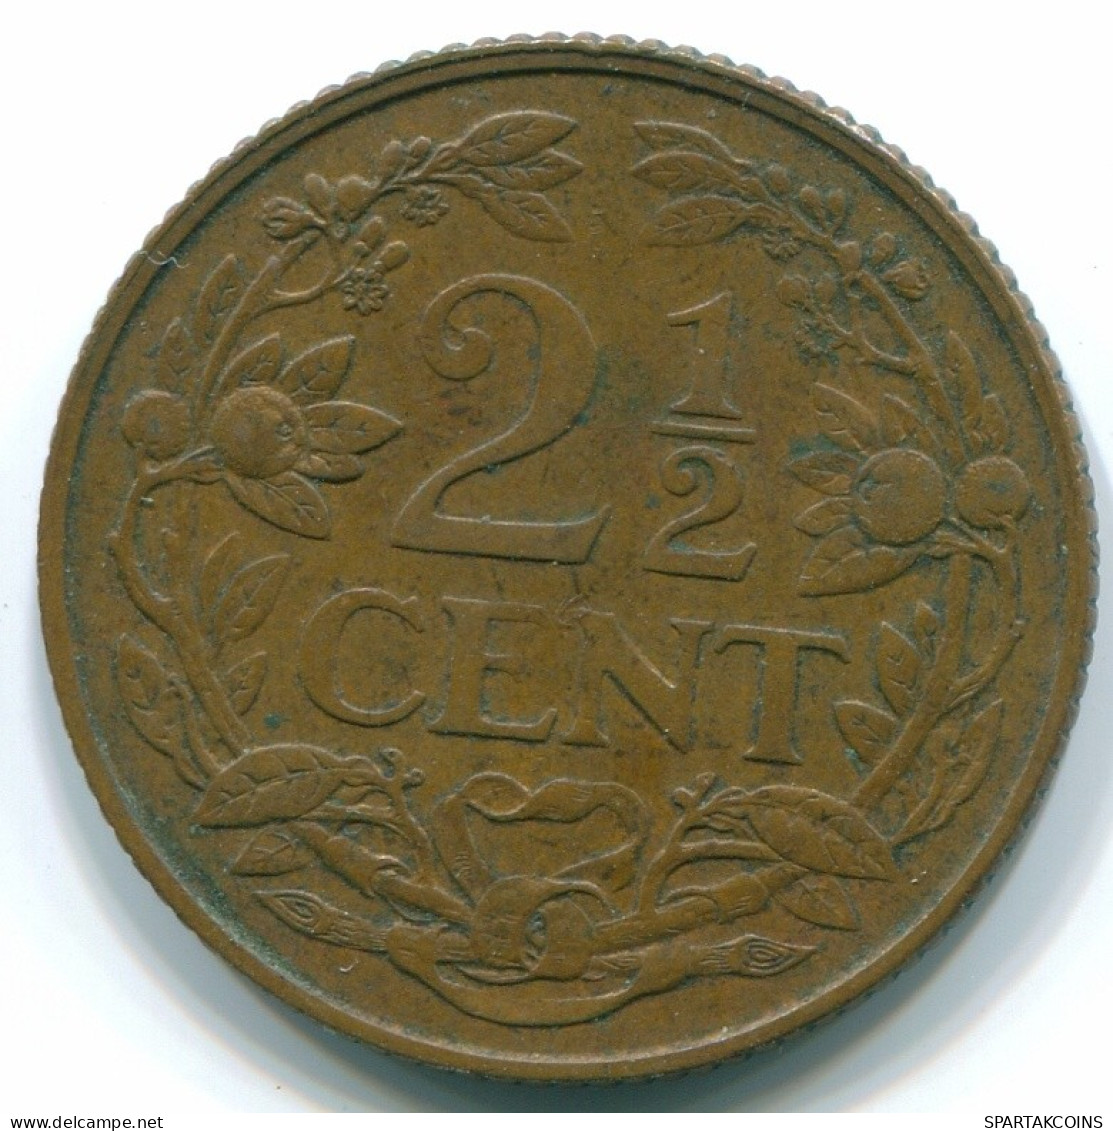 2 1/2 CENT 1959 CURACAO Netherlands Bronze Colonial Coin #S10159.U.A - Curacao